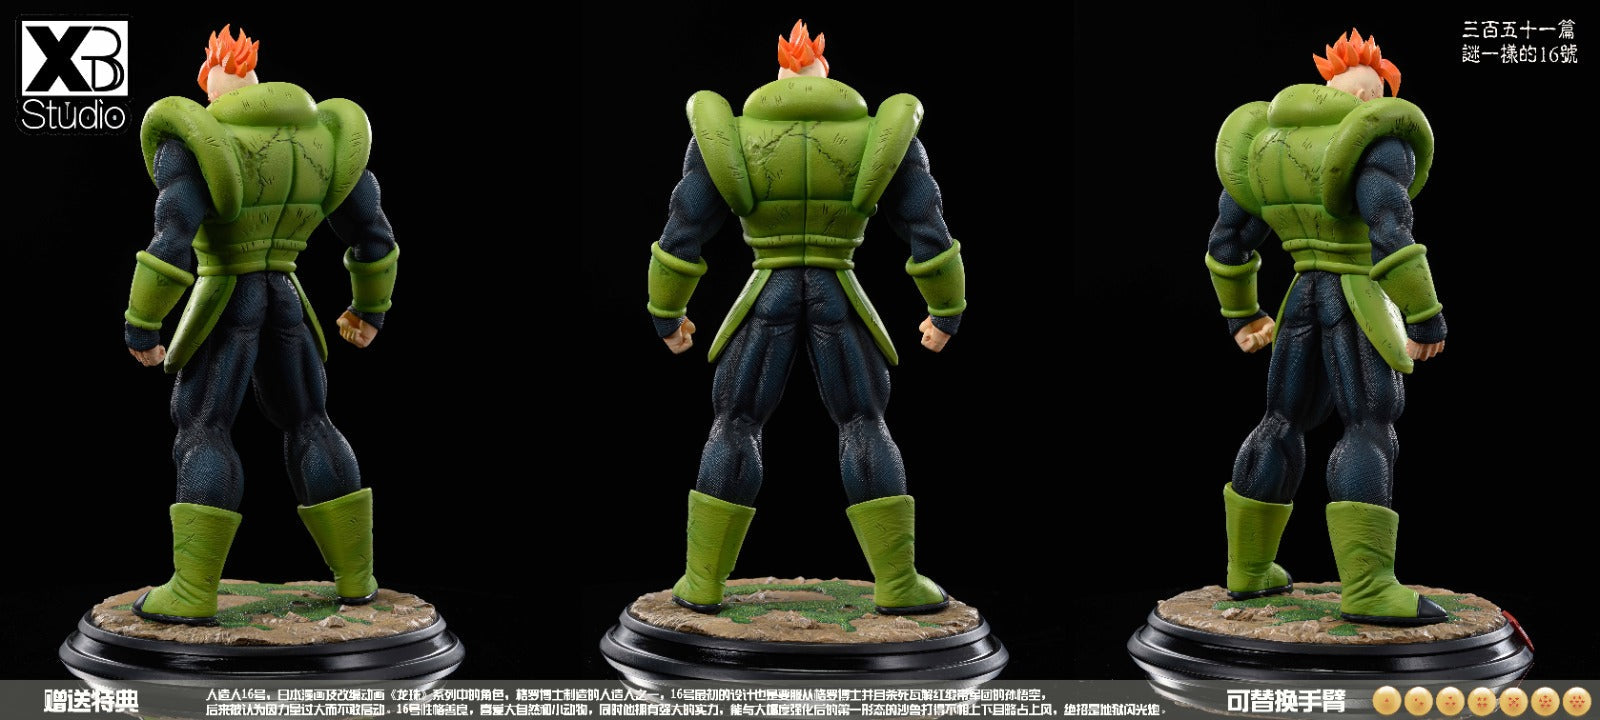 XBD - Android 16 StatueCorp